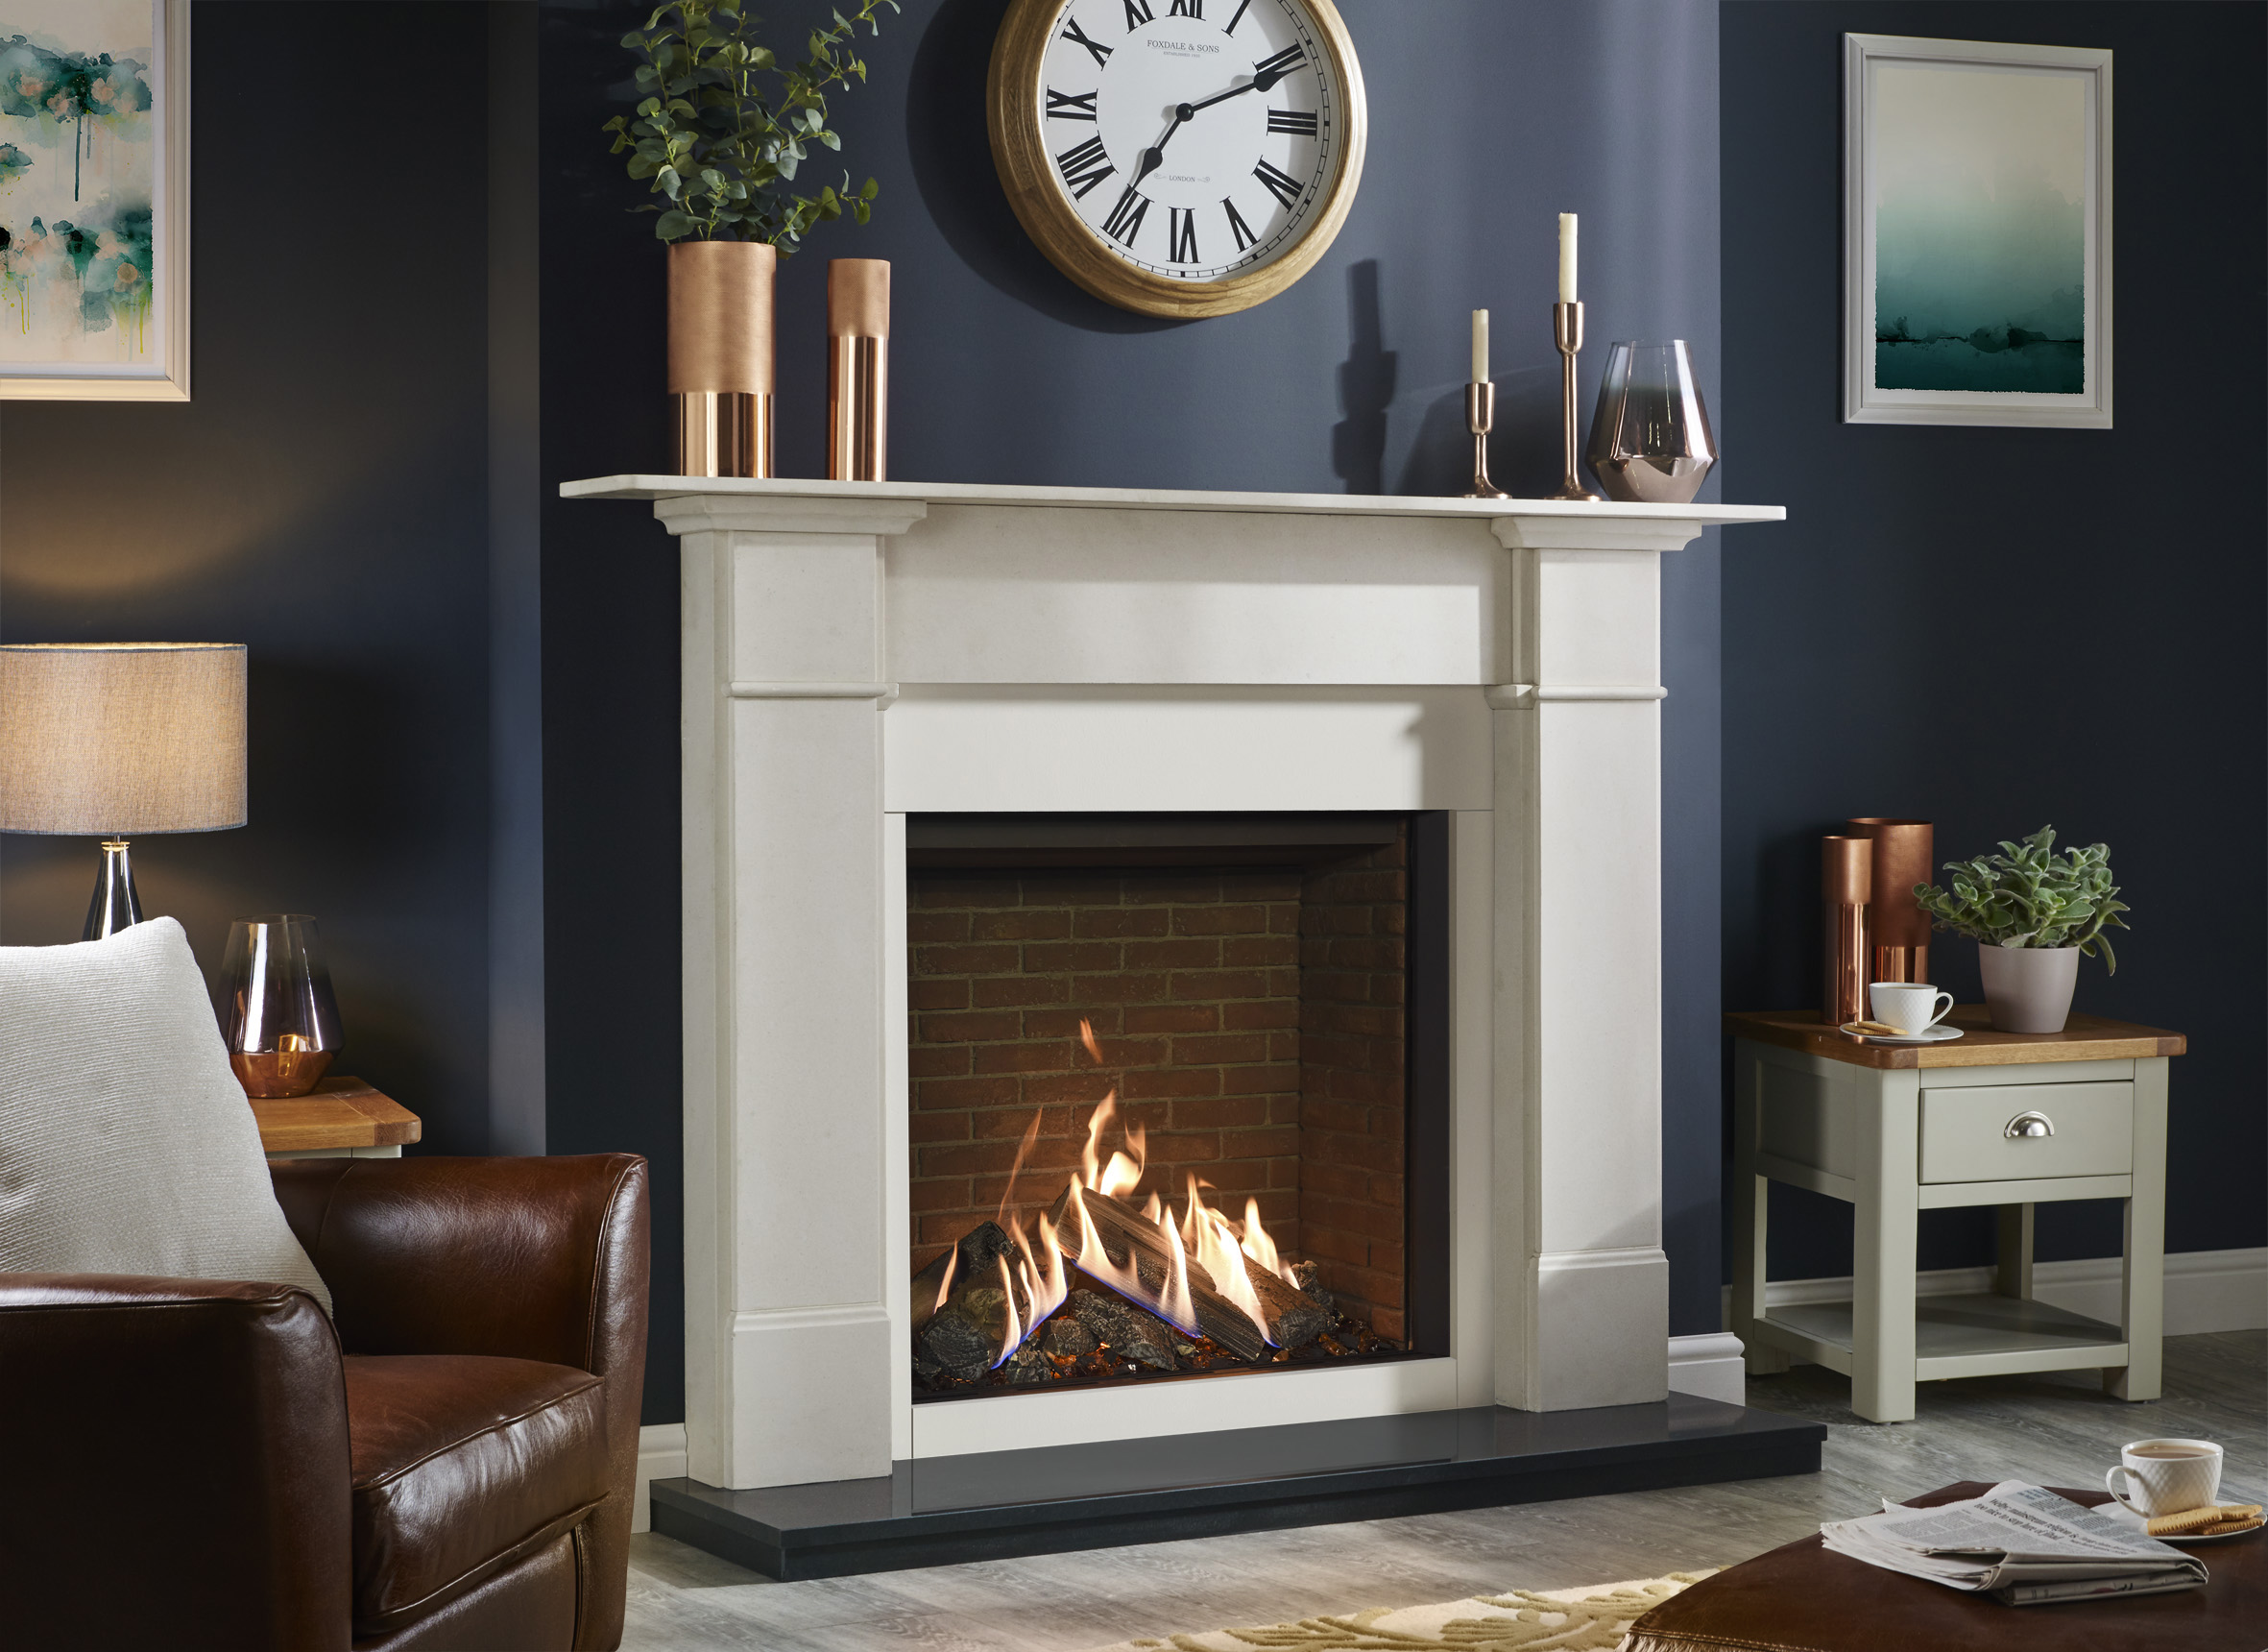 freestanding, granite hearth, slate hearth, woodburning, multifuel, Bangor, Newtownards, Belfast, Holywood, Conlig, Stove yard, Fireplaces, flue pipe, hearths, room heater, wilsons, Portaferry, Kircubbin, Greyabbey, riven slate, wooden beans, fireplace beams, fire chambers, open fires, logs, coal, grates, stove glass, grate bars, ards fireplaces, Jubilee Road, Helensbay, Crawfordsburn, flexi flue, chimney cowls, down draught cowls, gas, natural gas, reflex 75T, log effect fire, Gazco, stovax, medip, arada, varde, Henley, hunter, yeoman, glass hearths, electric fires, electric whole in the wall fires,